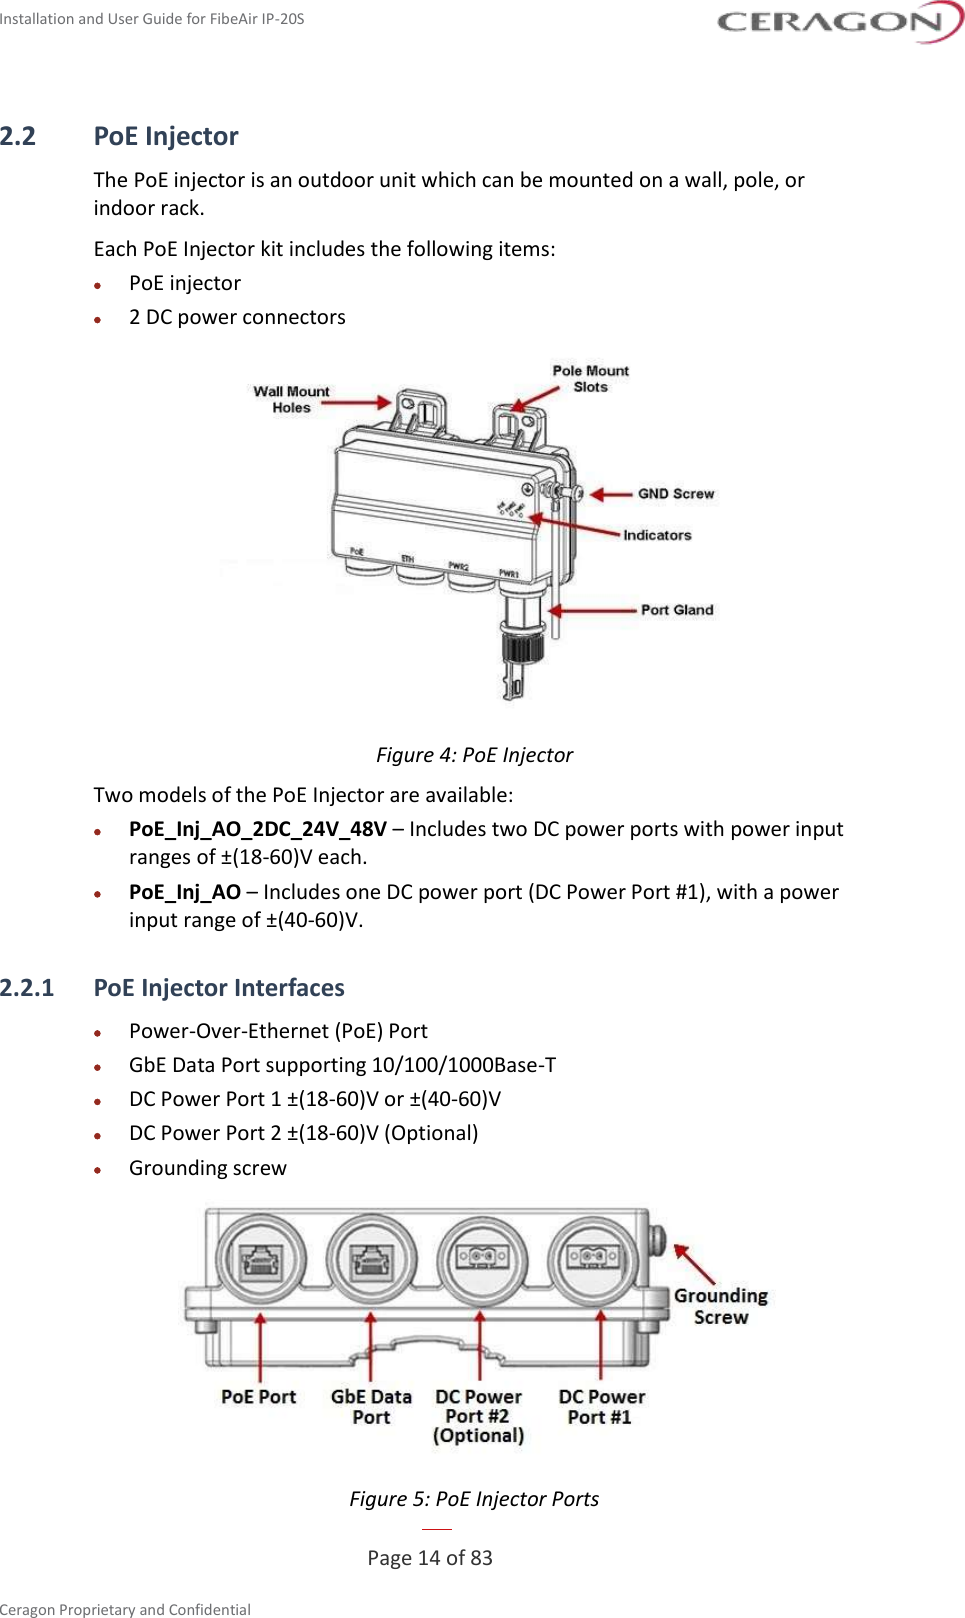 Installation and User Guide for FibeAir IP-20S   Page 14 of 83  Ceragon Proprietary and Confidential  2.2 PoE Injector The PoE injector is an outdoor unit which can be mounted on a wall, pole, or indoor rack. Each PoE Injector kit includes the following items: • PoE injector • 2 DC power connectors  Figure 4: PoE Injector Two models of the PoE Injector are available: • PoE_Inj_AO_2DC_24V_48V – Includes two DC power ports with power input ranges of ±(18-60)V each. • PoE_Inj_AO – Includes one DC power port (DC Power Port #1), with a power input range of ±(40-60)V. 2.2.1 PoE Injector Interfaces • Power-Over-Ethernet (PoE) Port • GbE Data Port supporting 10/100/1000Base-T • DC Power Port 1 ±(18-60)V or ±(40-60)V • DC Power Port 2 ±(18-60)V (Optional) • Grounding screw  Figure 5: PoE Injector Ports 